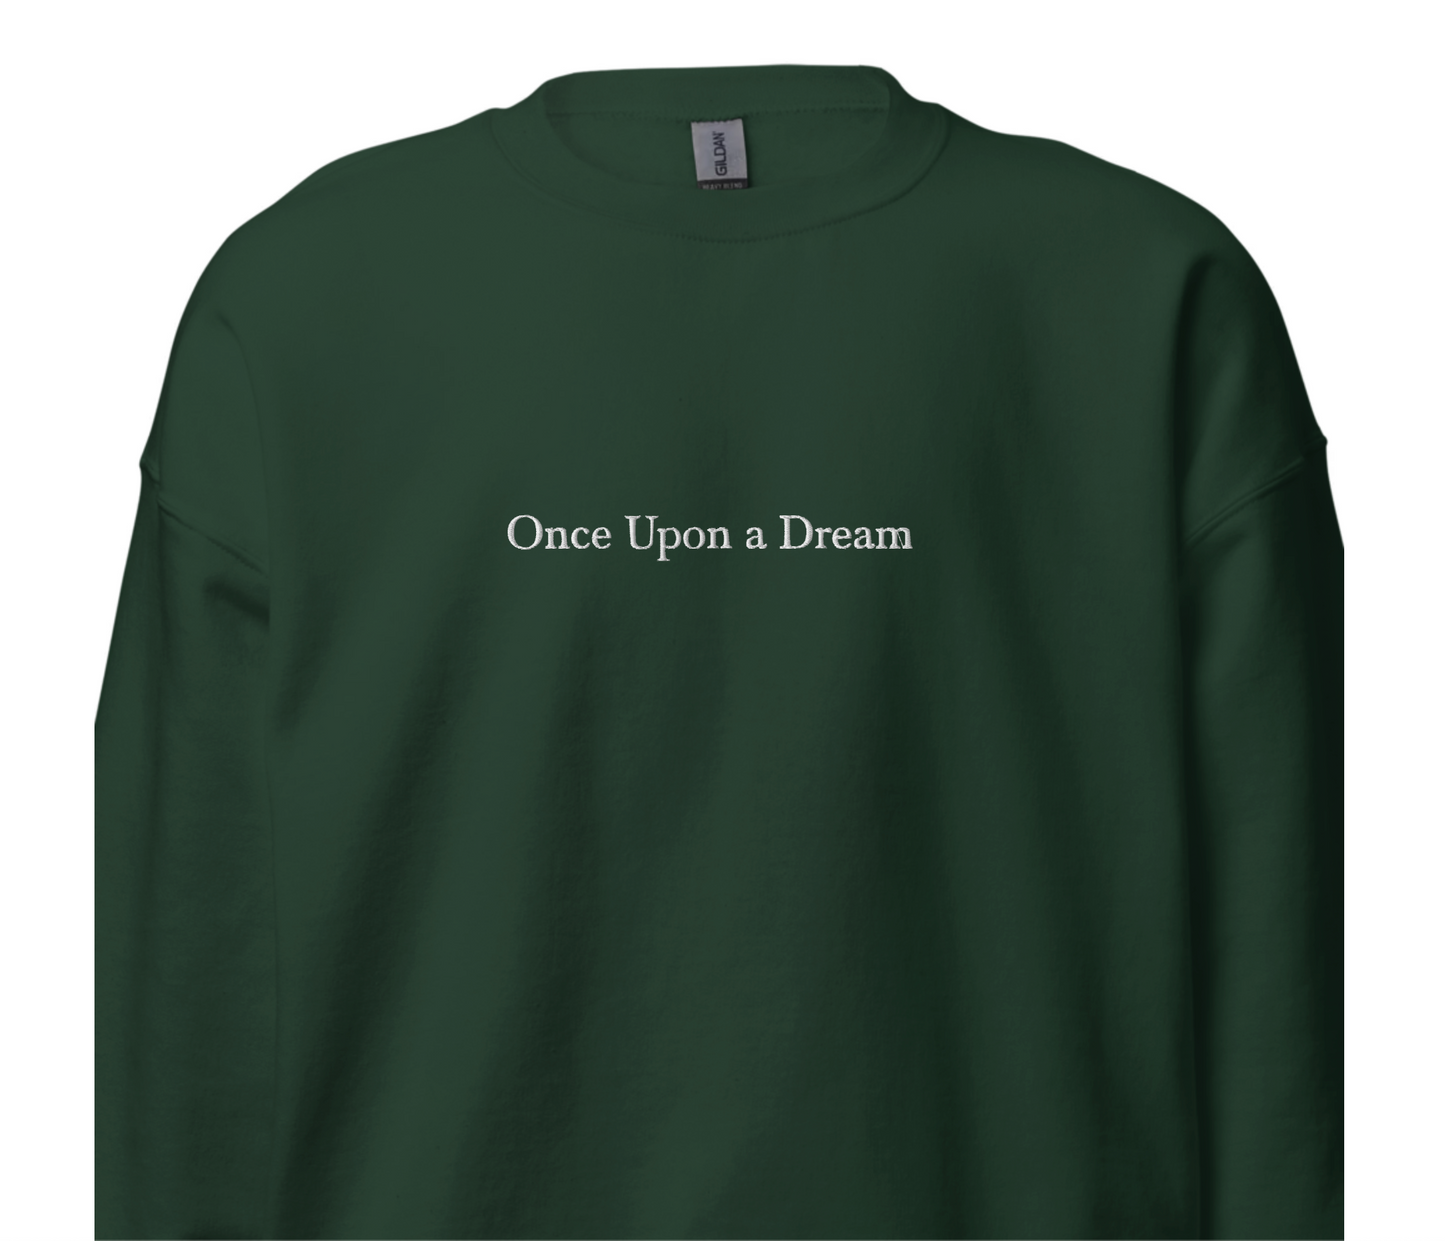 Once Upon a Dream Sweatshirt